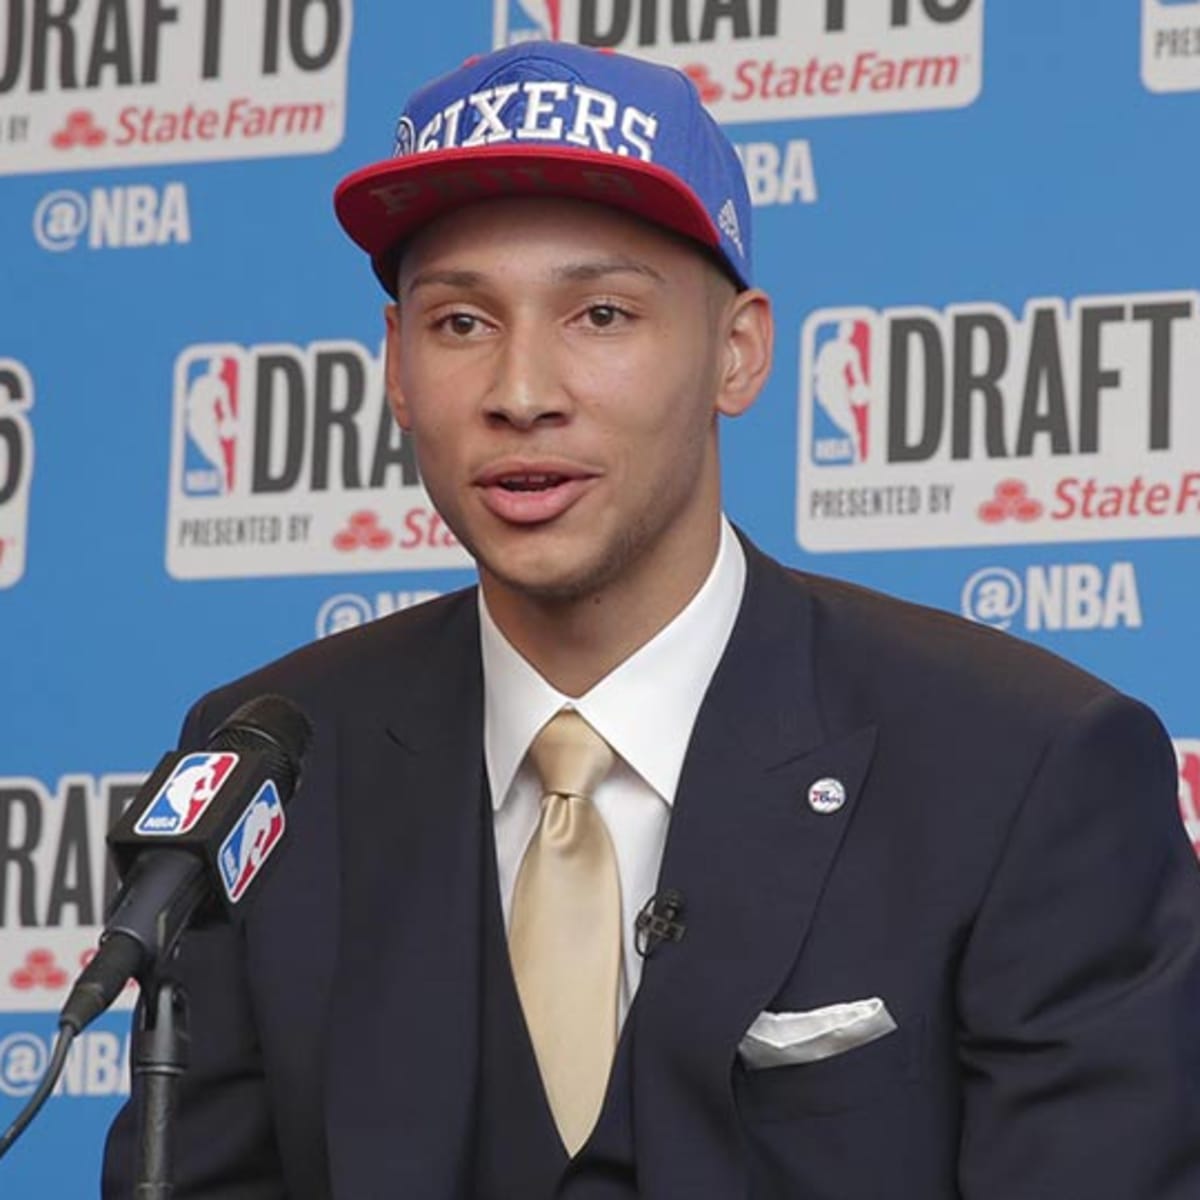 NBA Twitter reacts to Ben Simmons' colorful outfit for Celtics